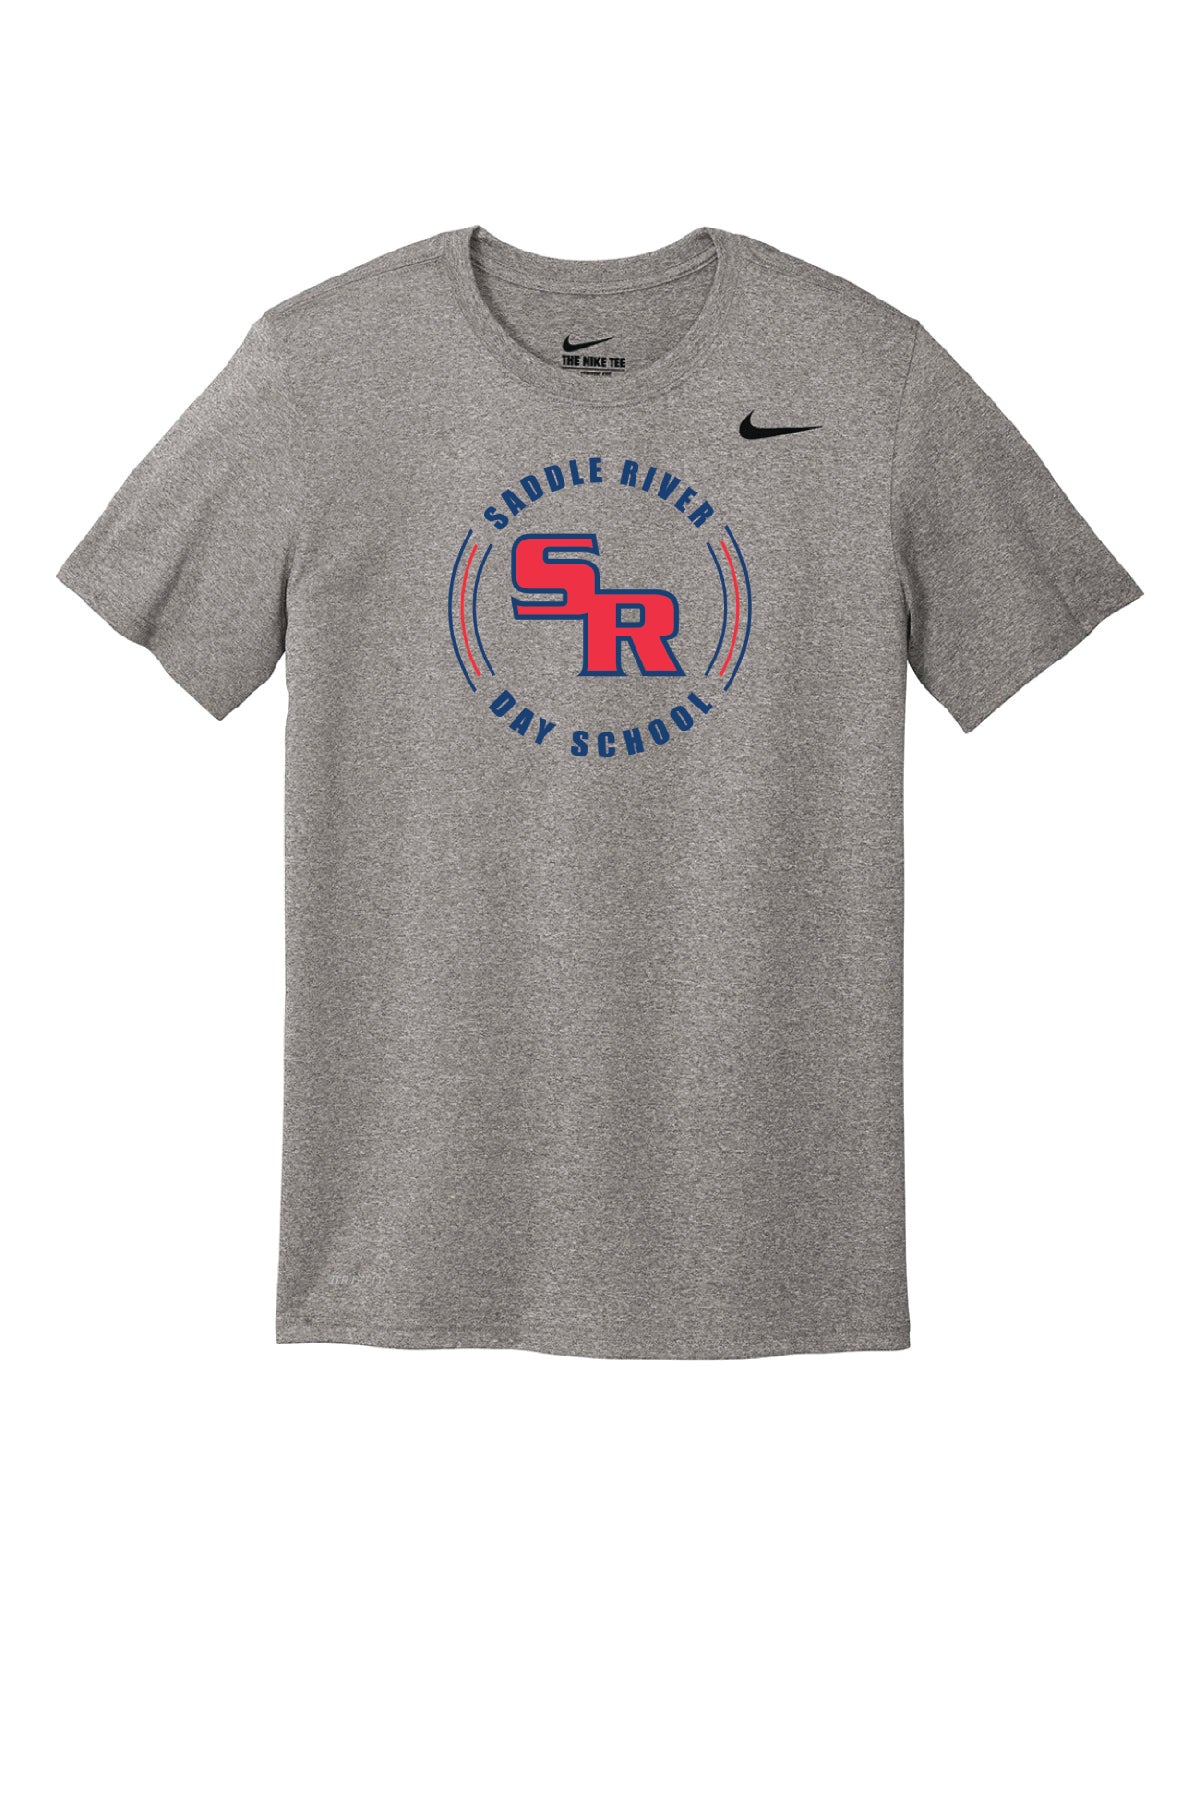 Saddle River Day School Nike Youth Legend Tee